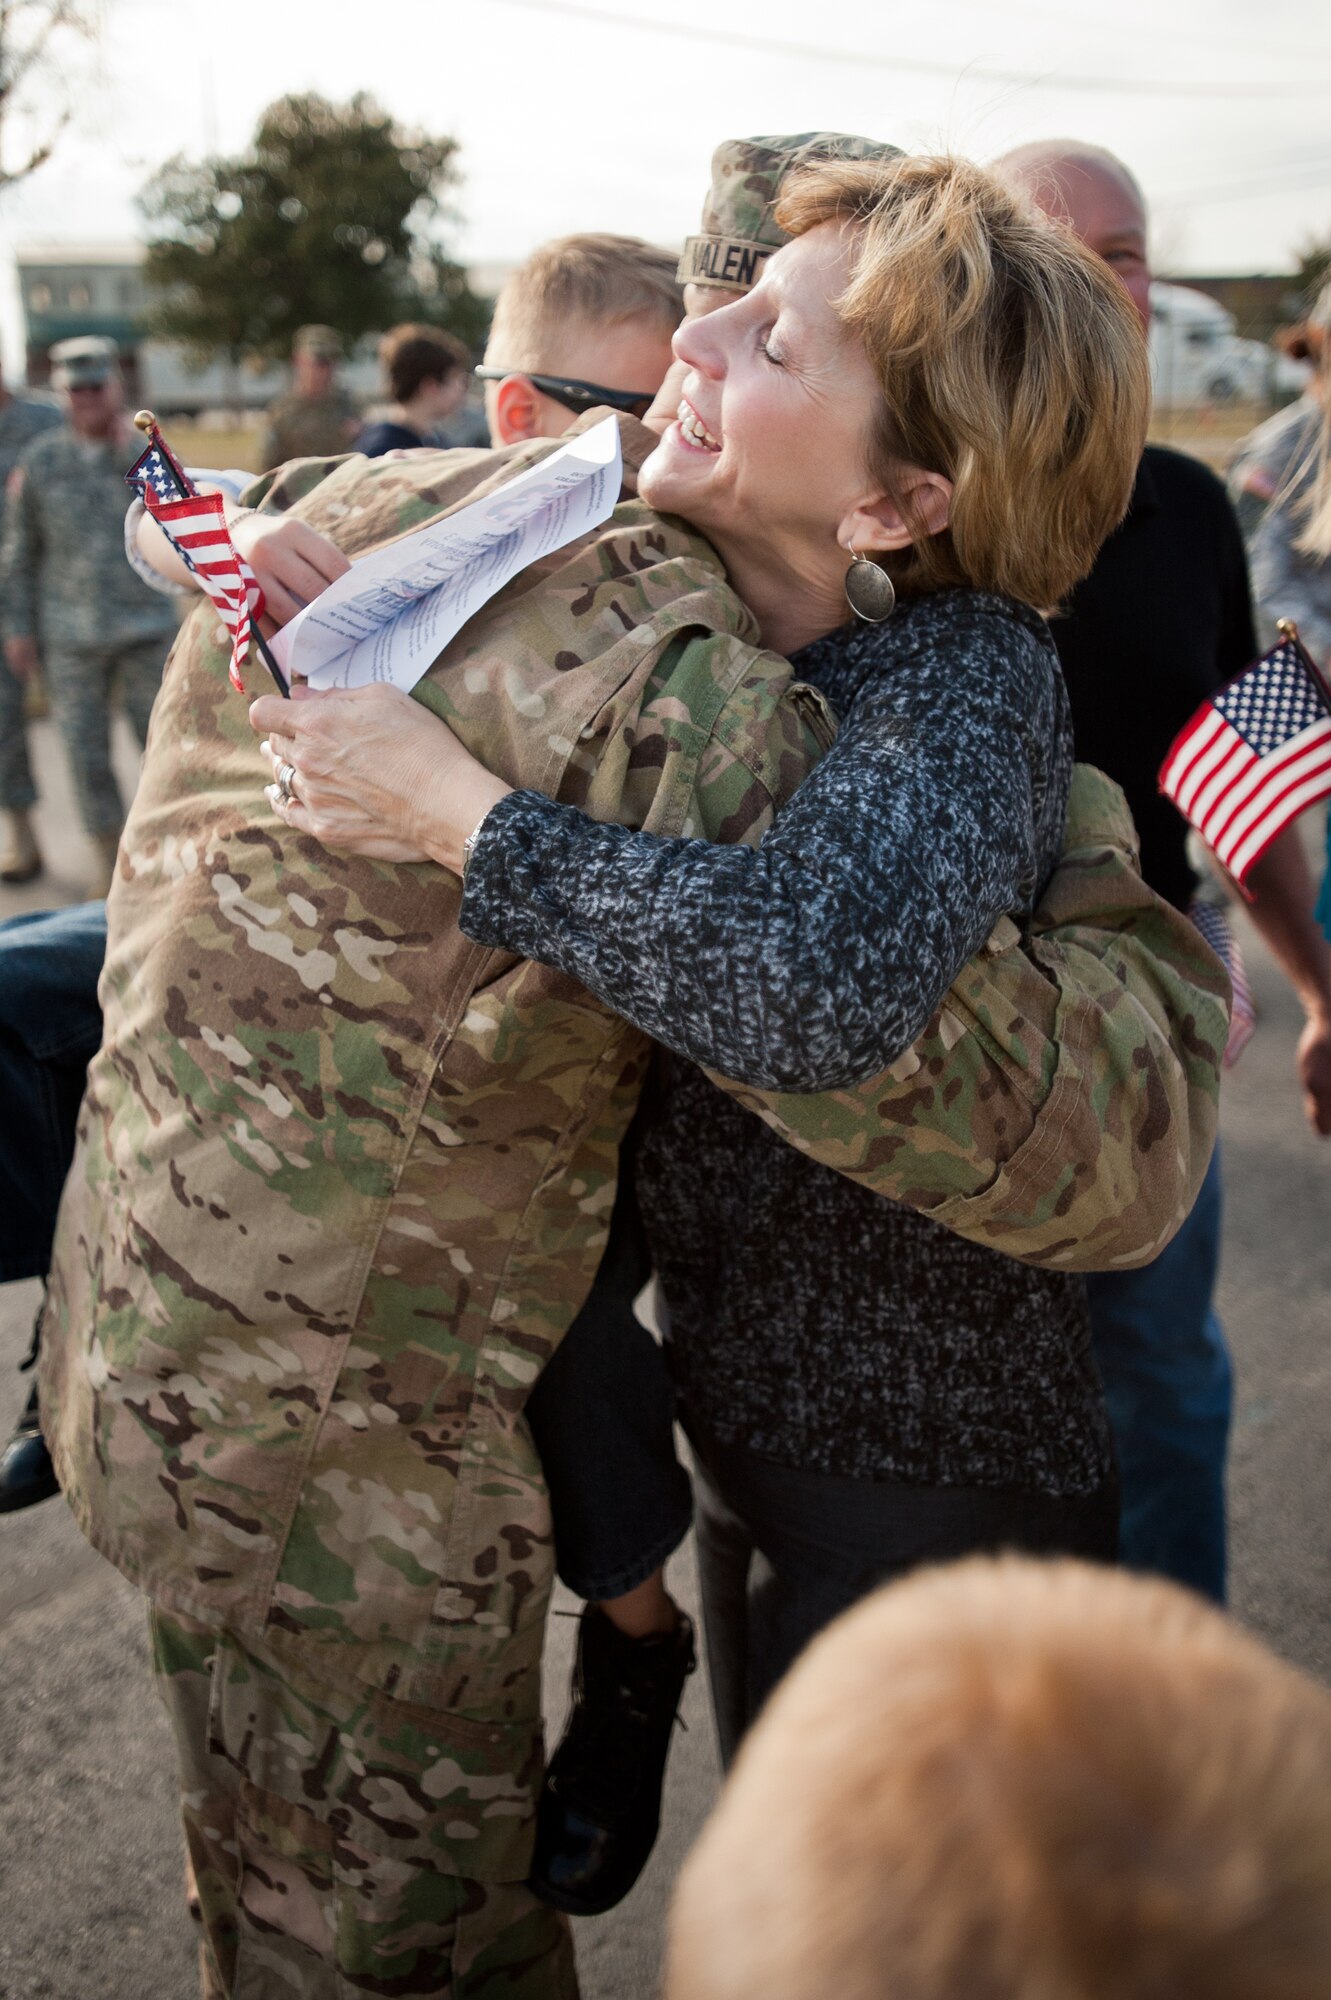 Judy Tabor hugs her son-in-law, Staff Sgt. Jeff Valentine, during a welcome-home ceremony held Feb 28, 2012, at the Kentucky Air National Guard Base in Louisville, Ky. Valentine was one of 58 Kentucky Army and Air National Guard Soldiers and Airmen who have been deployed to Afghanistan for the past nine months as part of the Kentucky National Guard's Agribusiness Development Team 3. The team???s mission was to help Afghan farmers develop sustainable agriculture. Its members were instrumental in coordinating the first-ever commercial mulberry harvest in the Panshir Valley, producing 75 metric tons of mulberries and netting $45,000 for local farmers. (U.S. Air Force photo by Maj. Dale Greer)